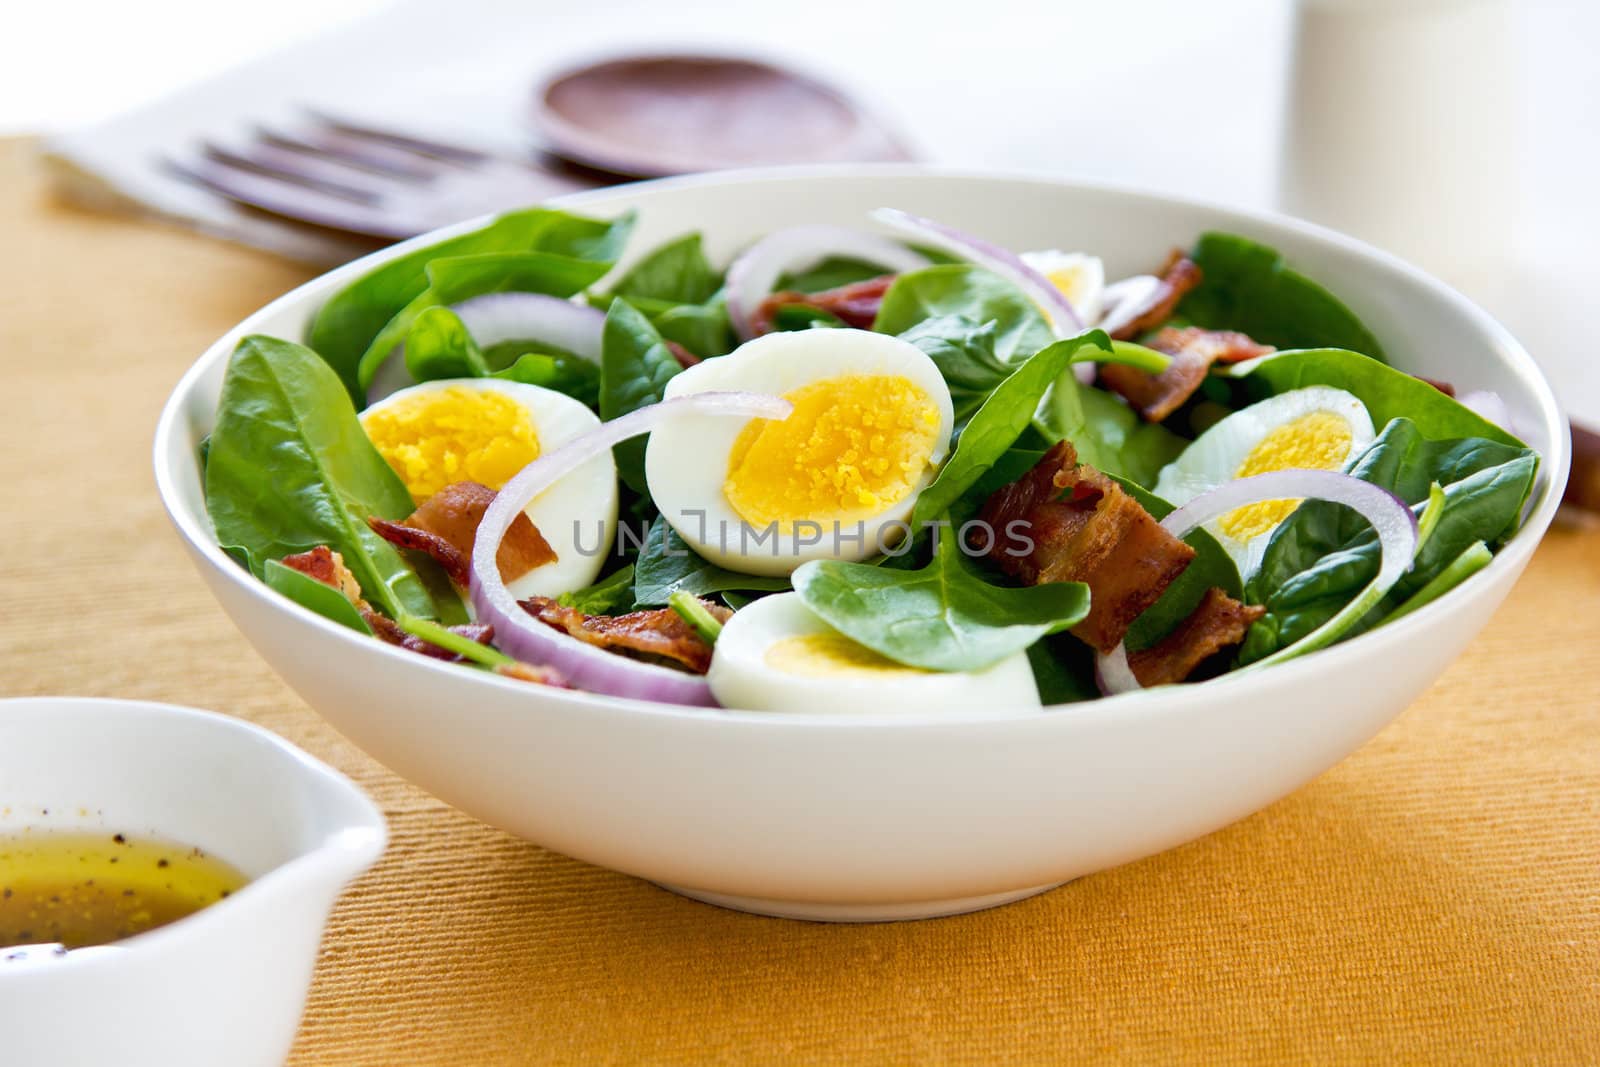 Bacon with egg and spinach salad by vanillaechoes